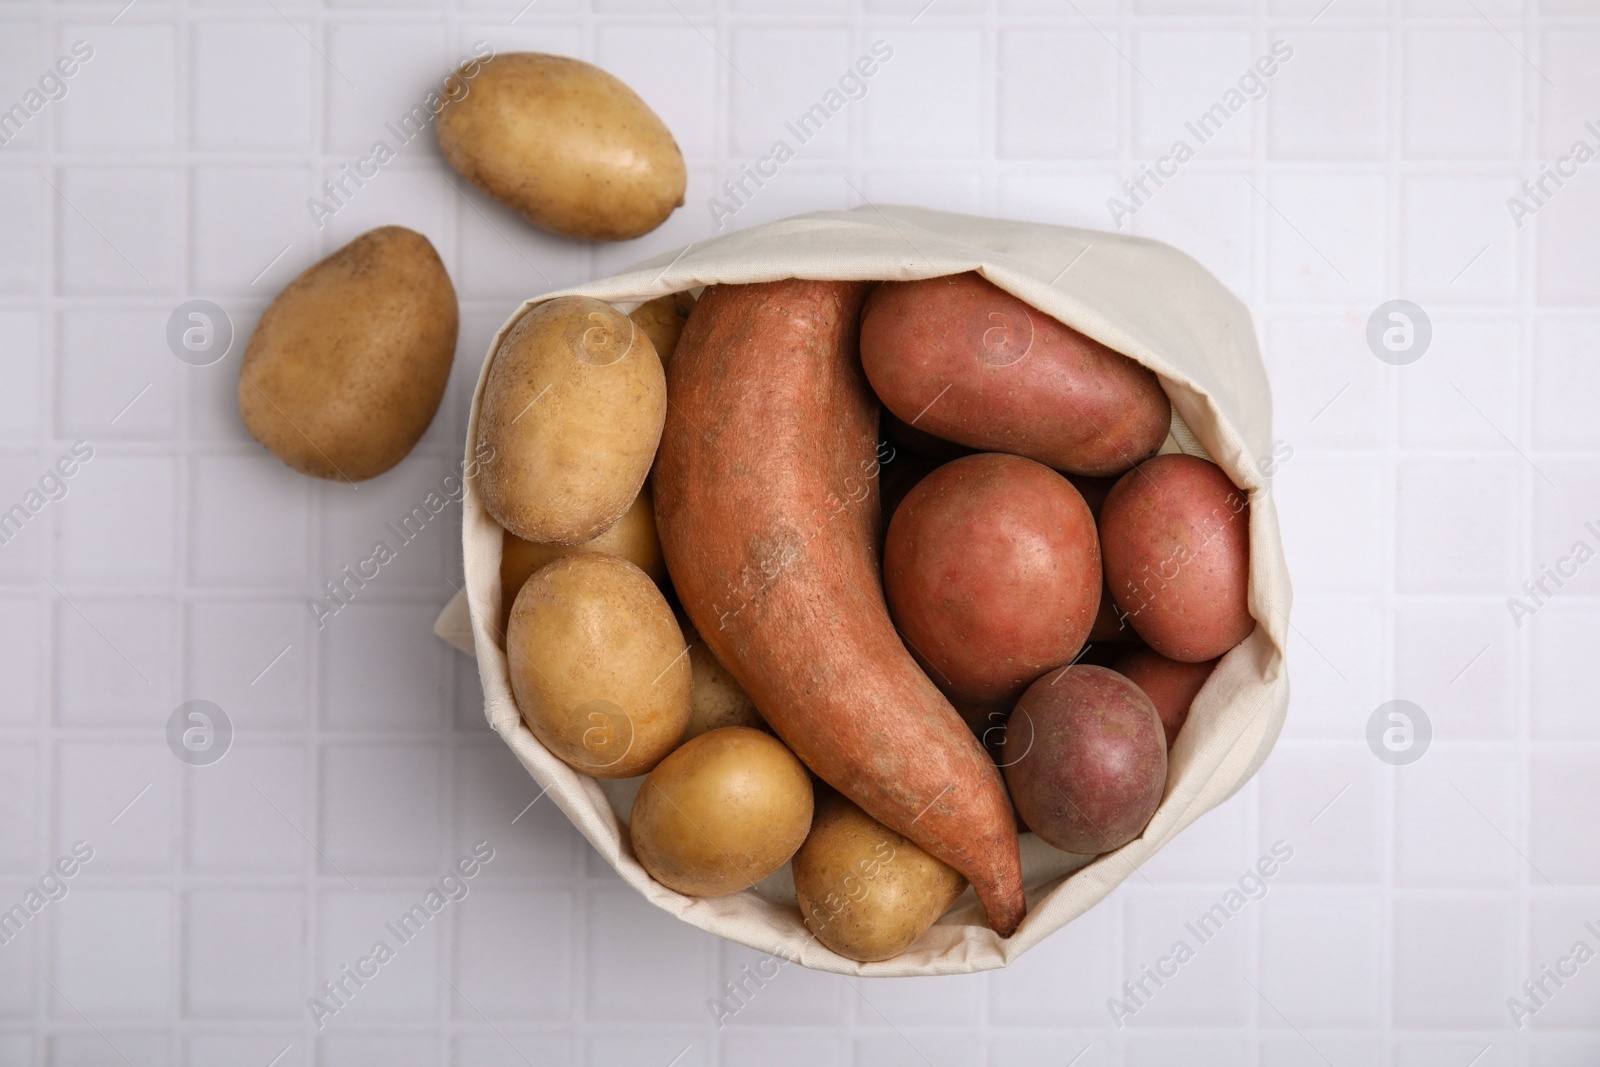 Photo of Different types of fresh potatoes in bag on white table, top view